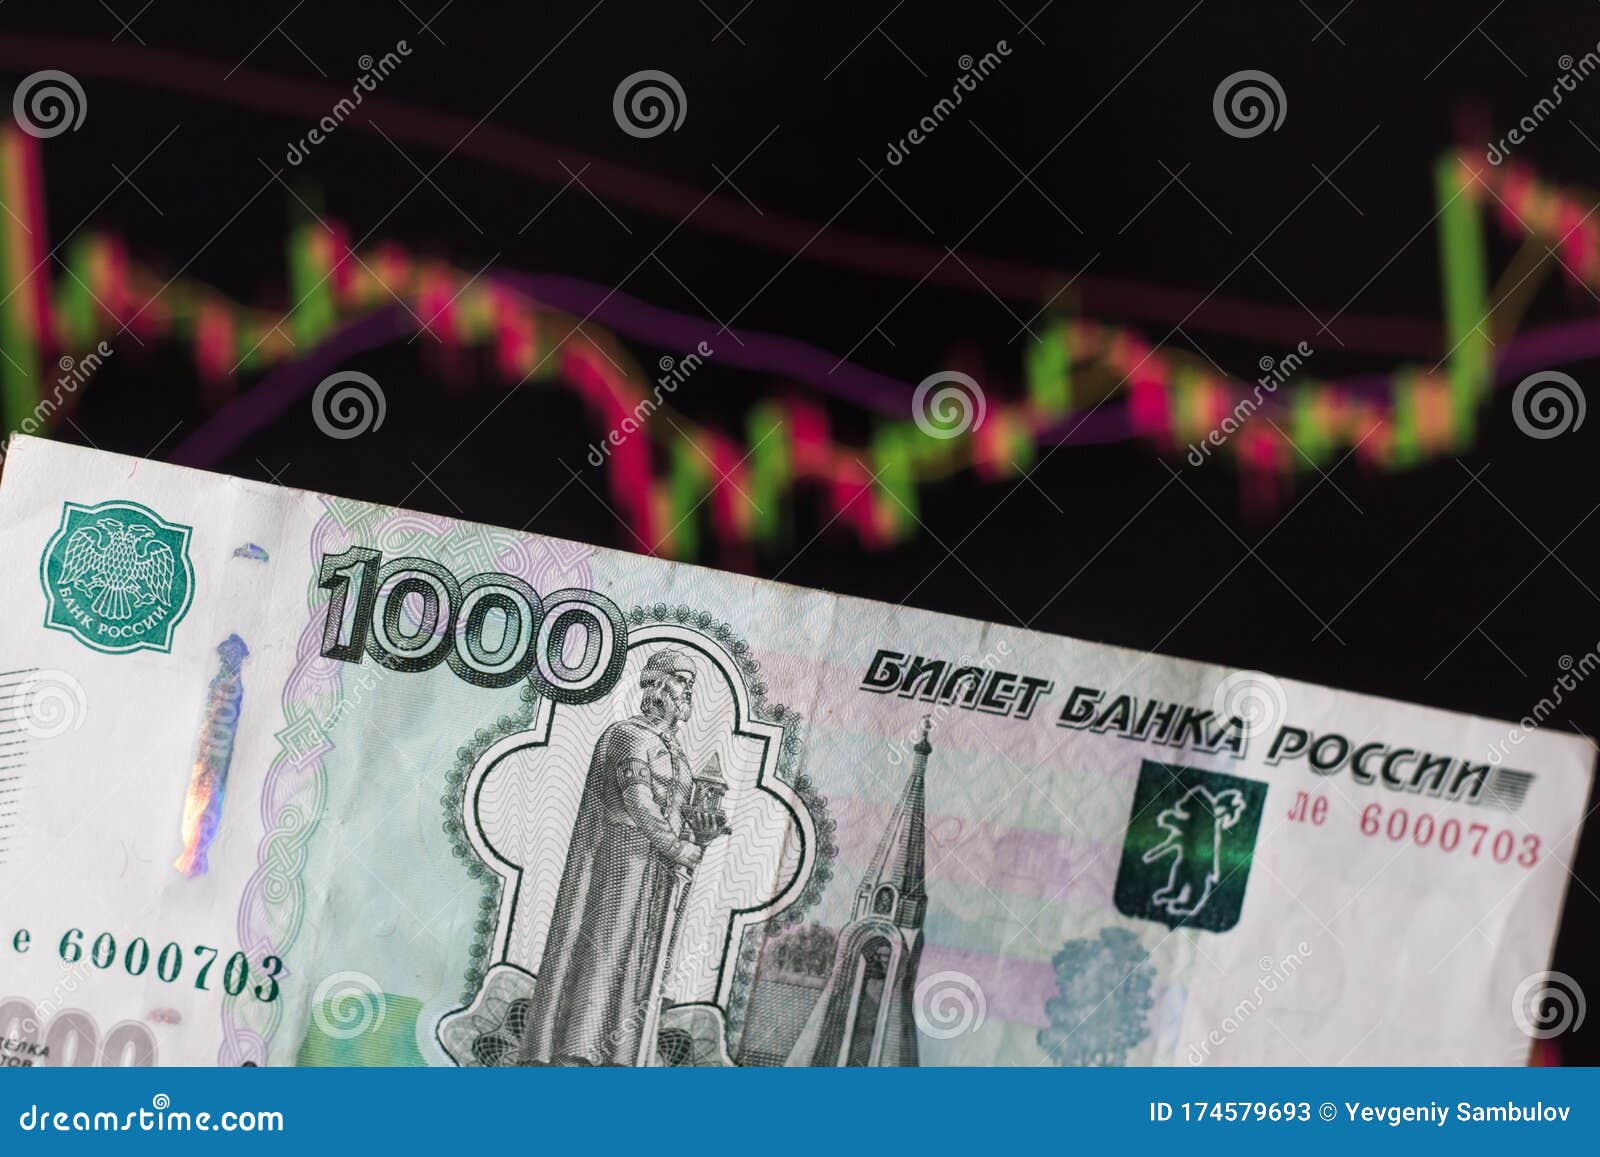 Forex trading ruble buying shell shares